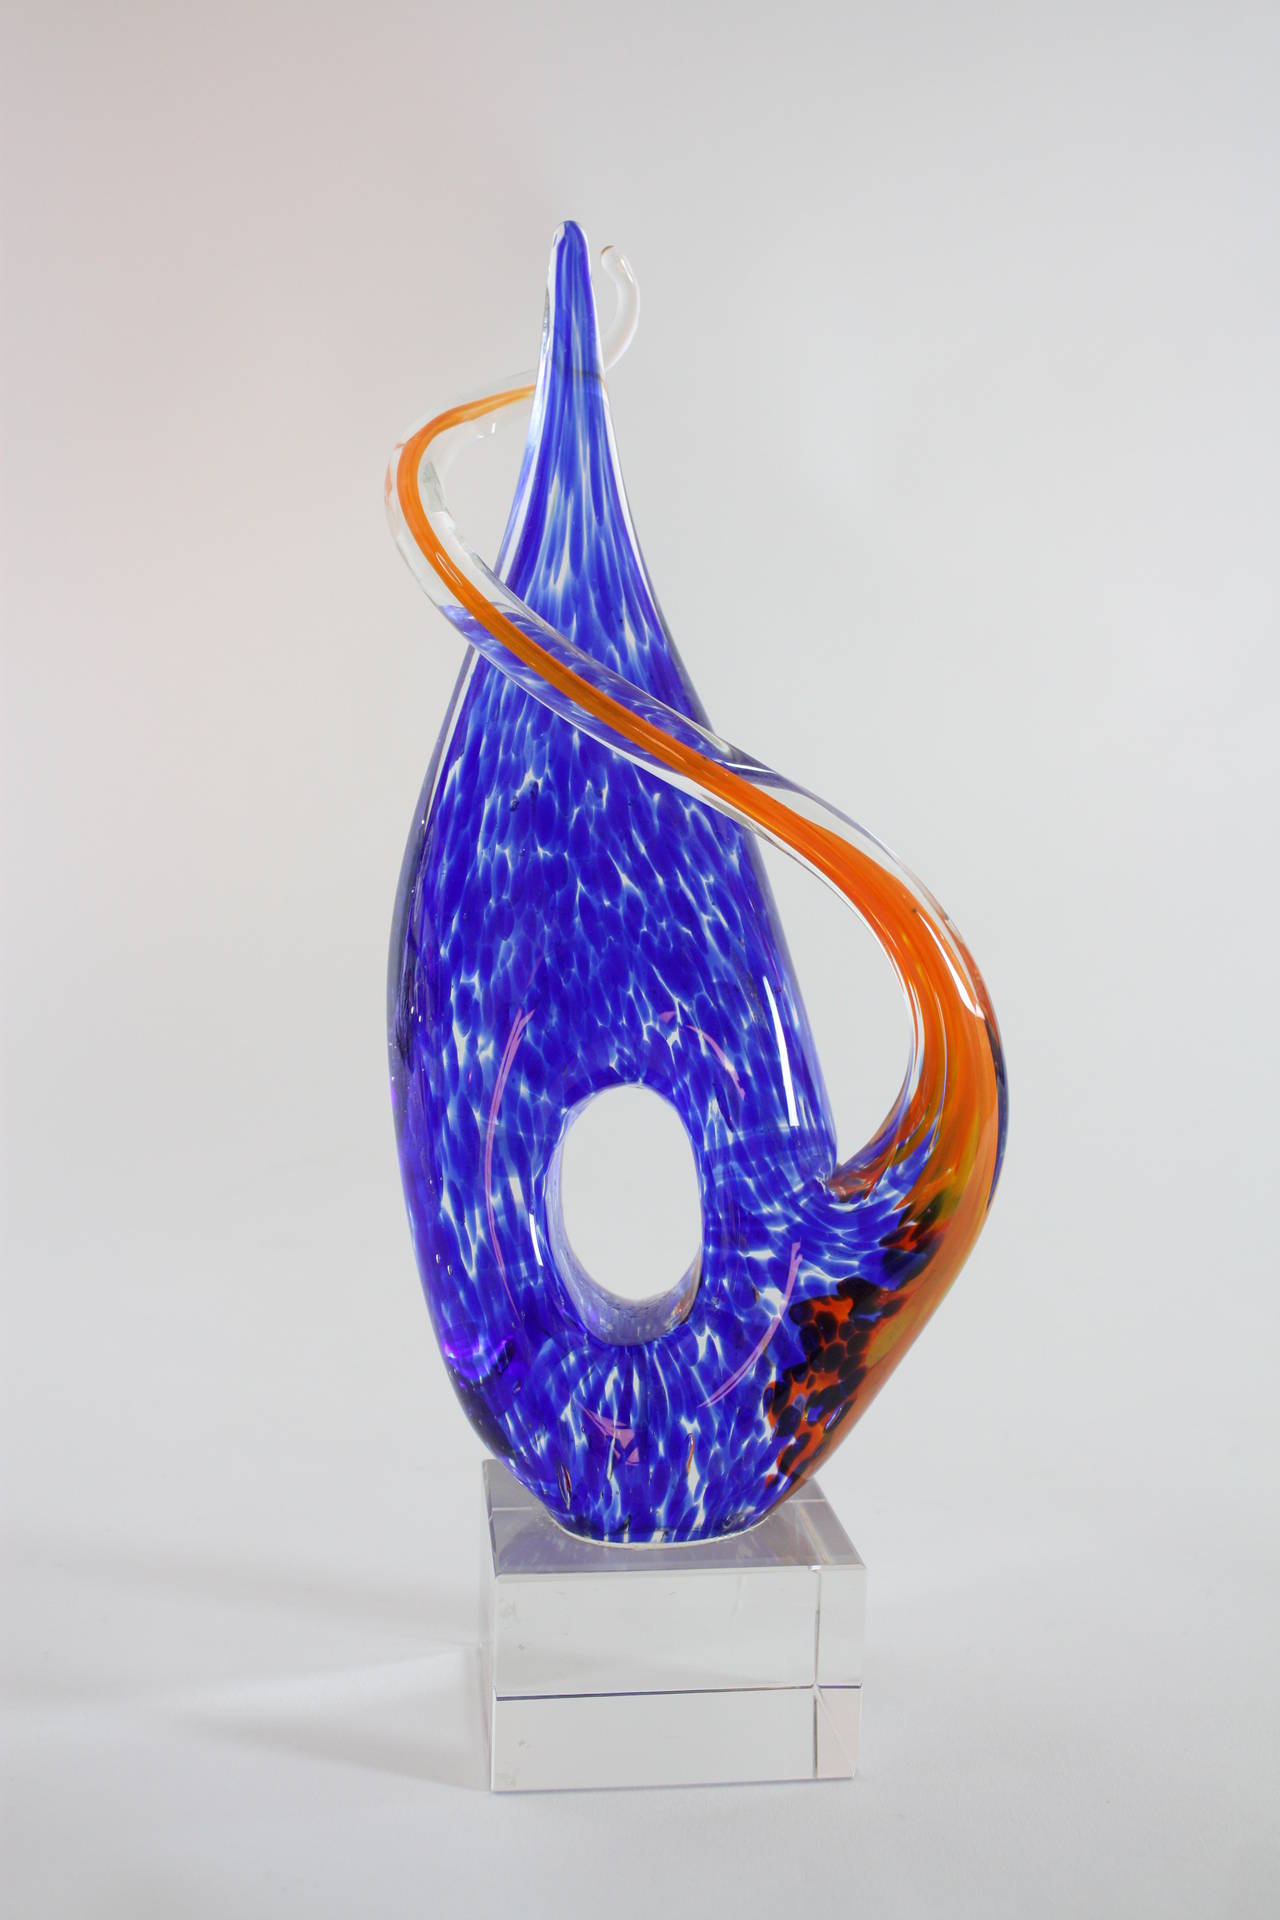 Beautiful abstract Murano glass sculpture. It could be a representation of water and fire with its vibrant orange and blue colors. Artist unknown.